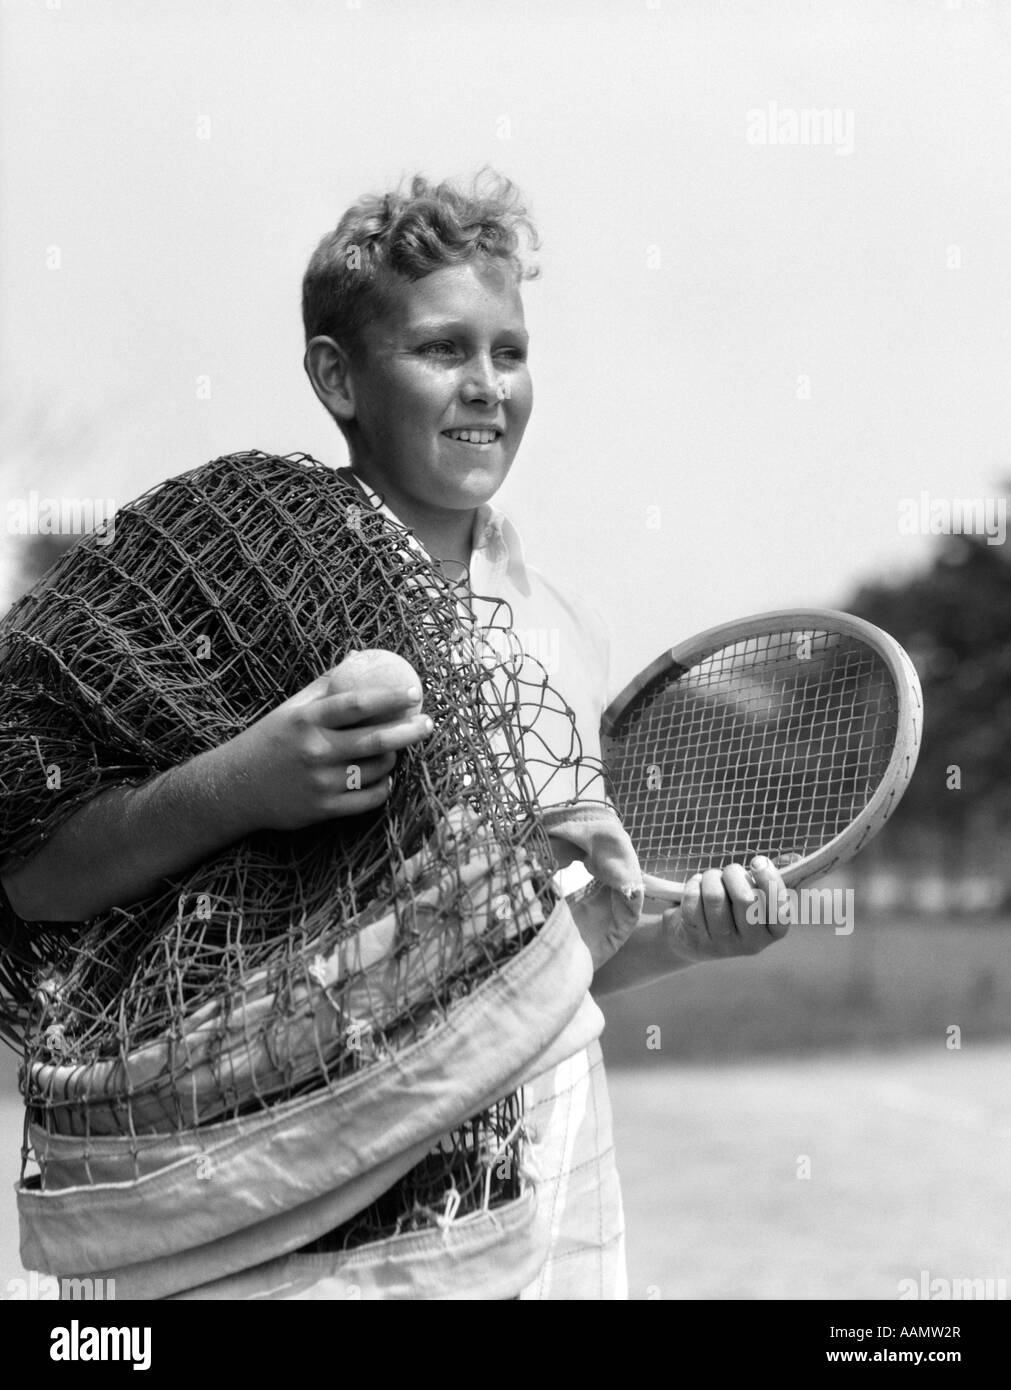 1920s 1930s BOY TENNIS PLAYER HOLDING RACKET NET AND BALL Stock Photo